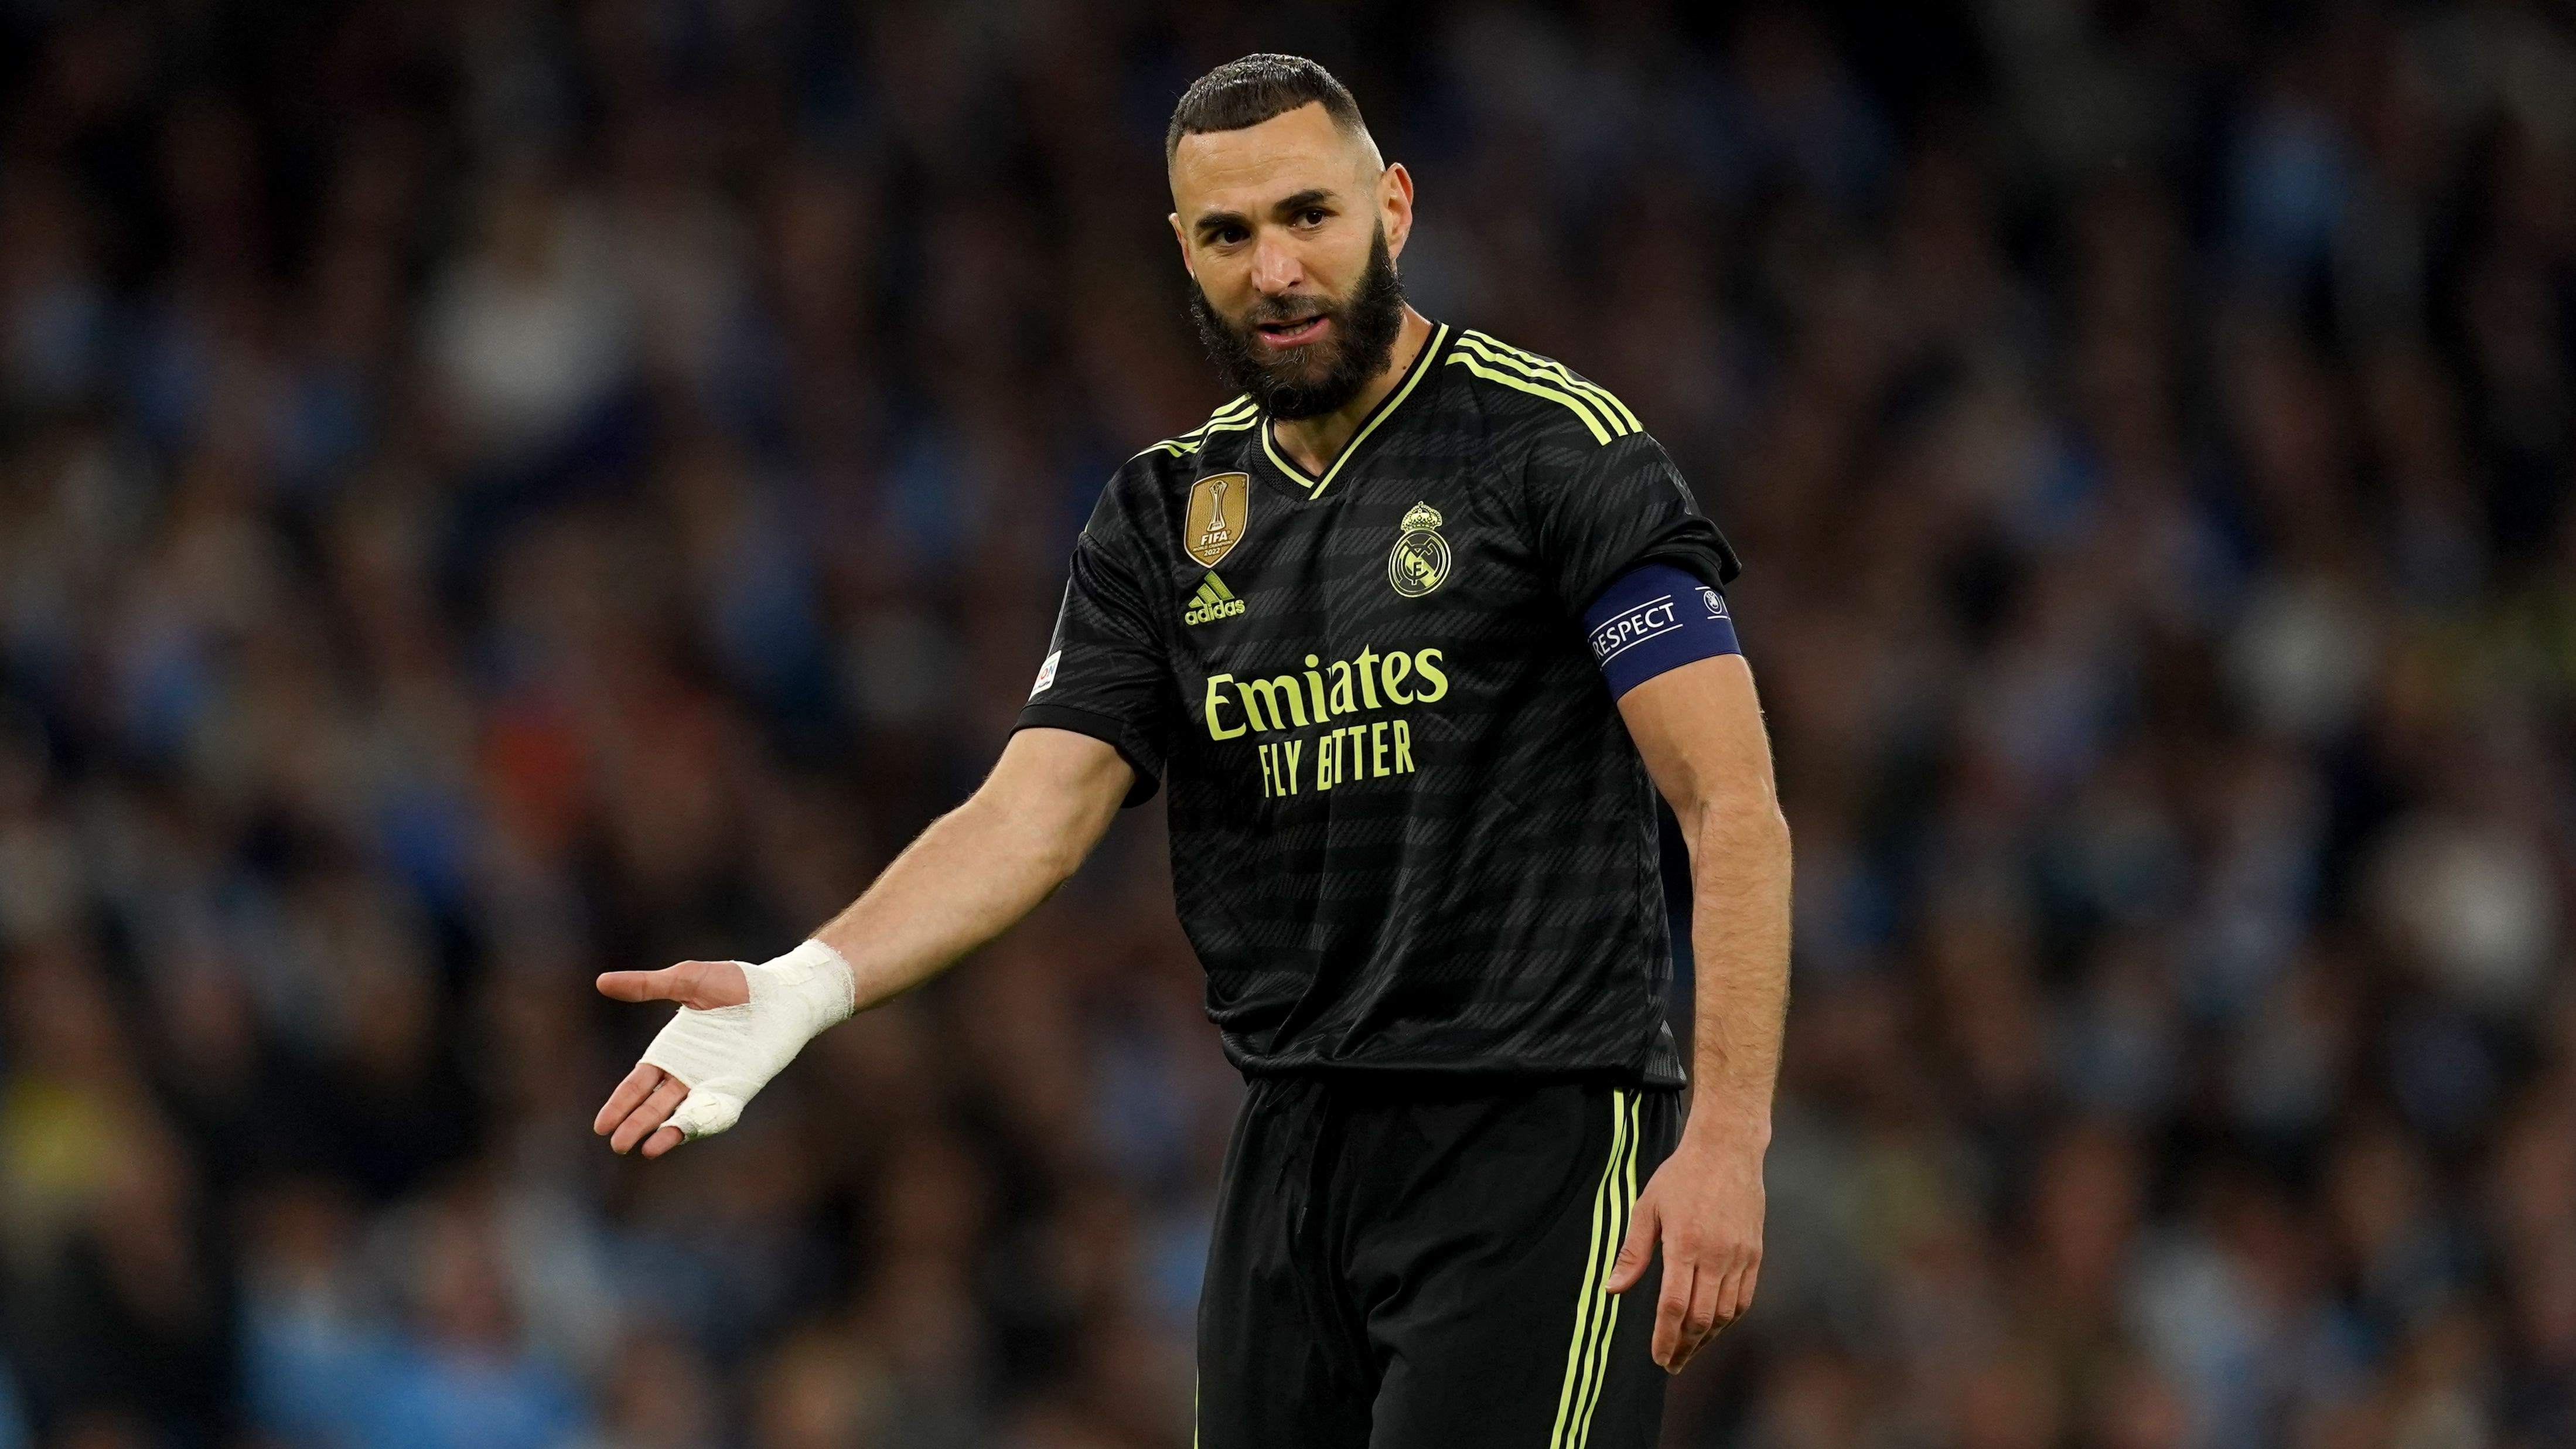 Football rumours: Karim Benzema eyes possible move to Premier League